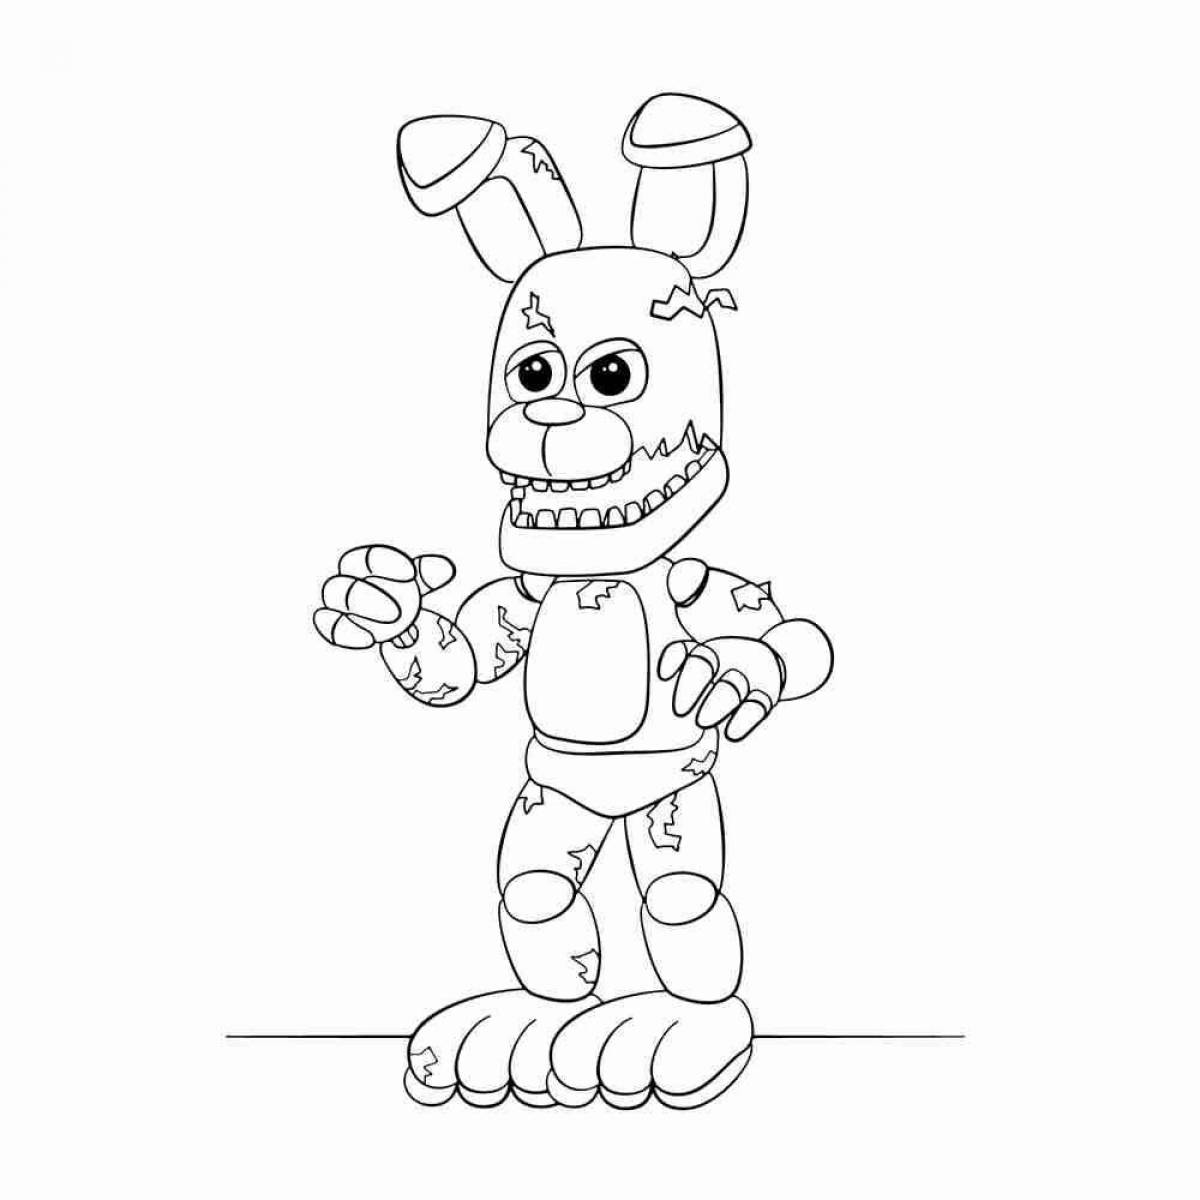 Attractive fnaf world coloring page